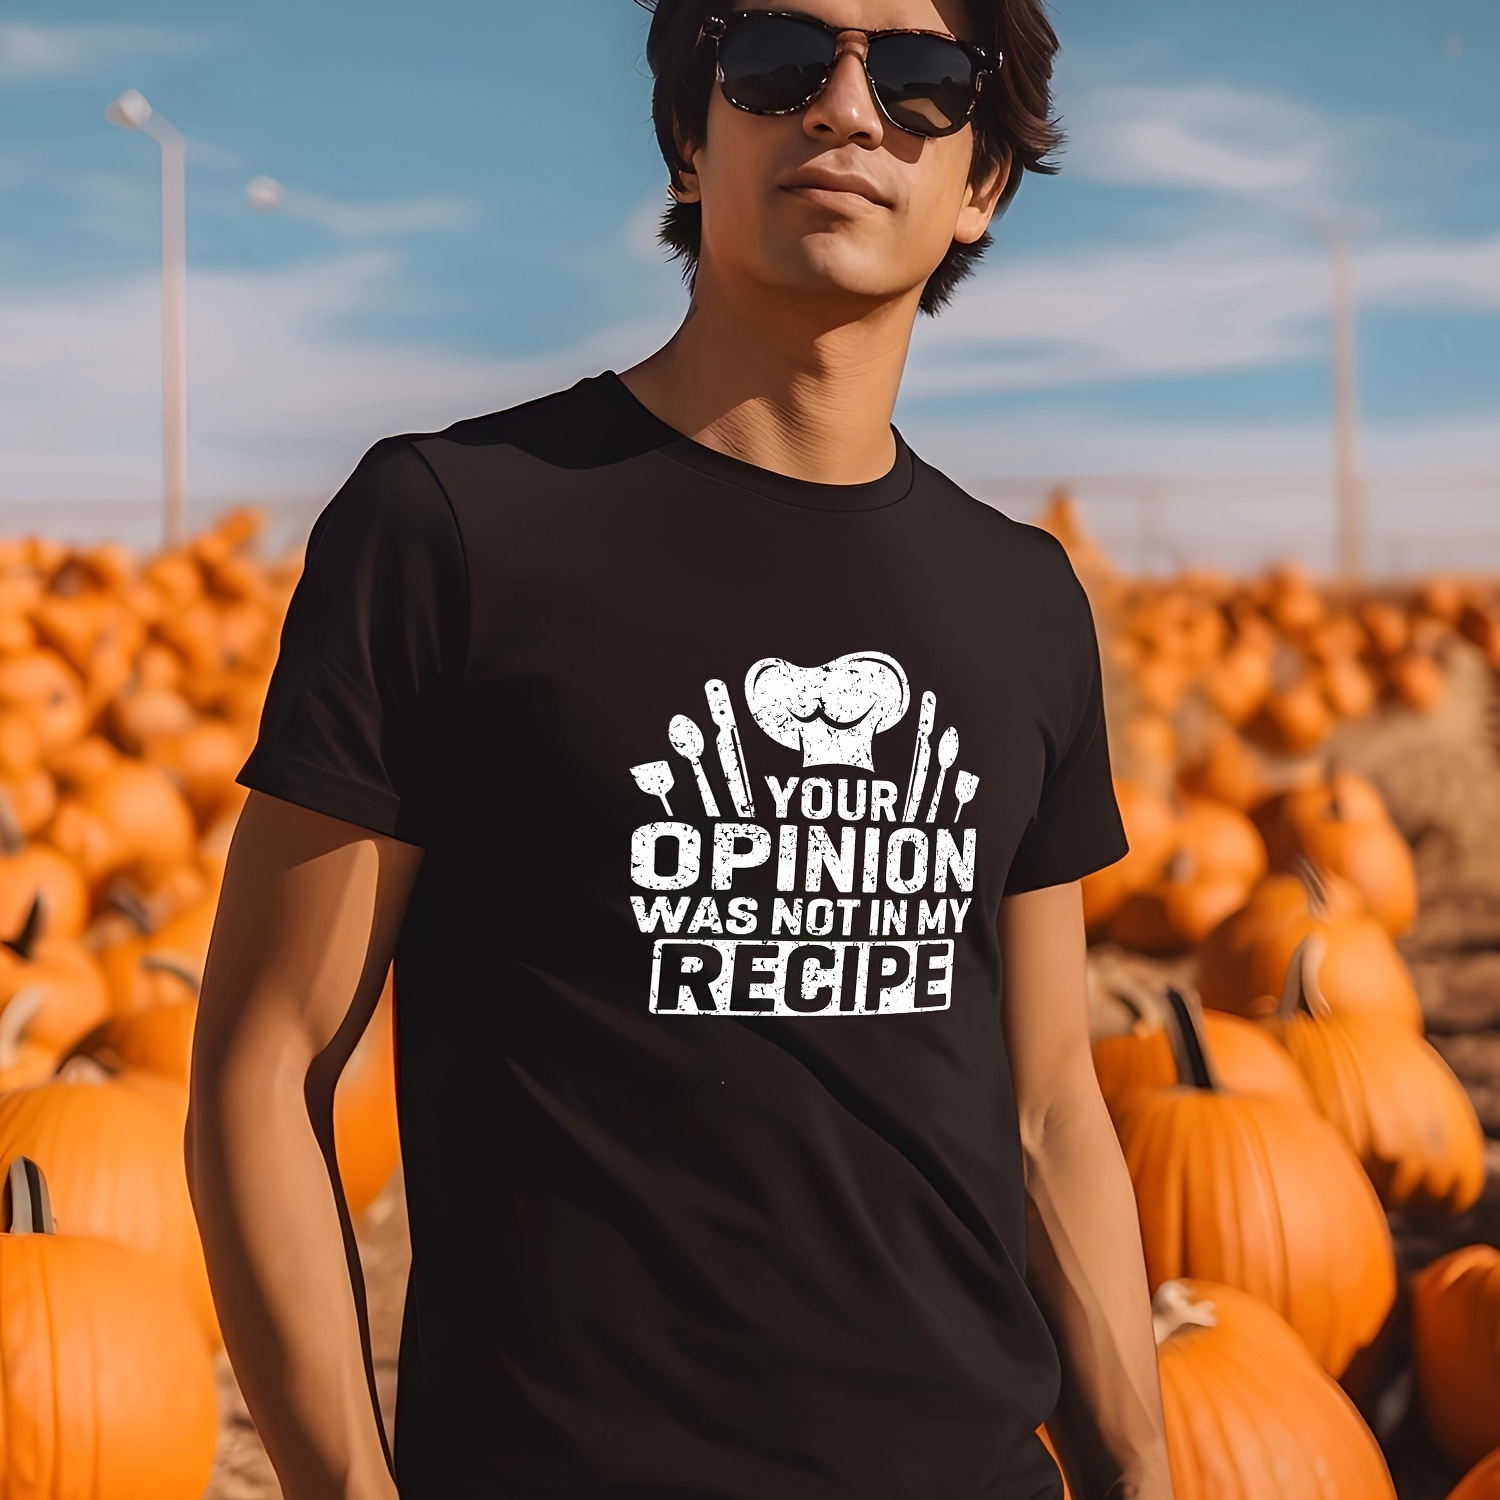 

Men's Black Cotton T-shirt With Bold White Graphic Of Chef Hat And Forks, Featuring The Text "your Opinion Was Not In My Recipe" - Unique And Stylish Short Sleeve Tee